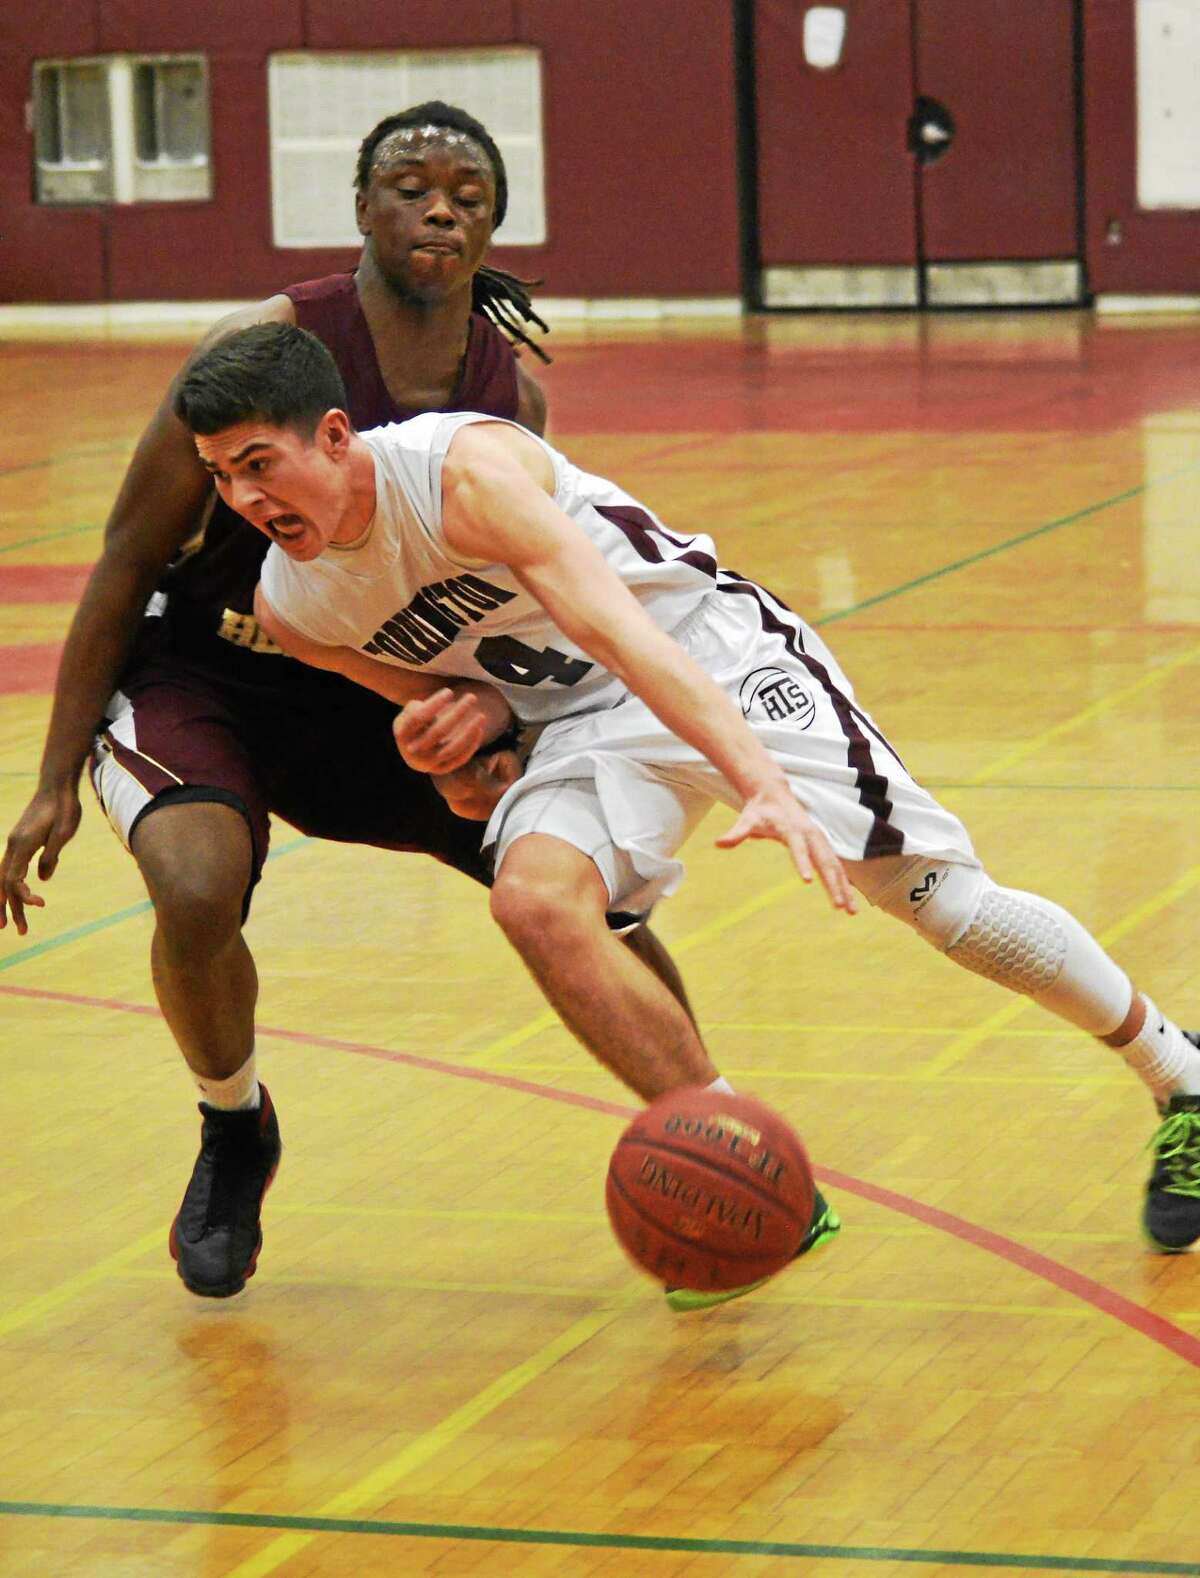 Torrington’s John McCarthy drives to the lane in the Red Raiders’ 77-56 loss to Sacred Heart.